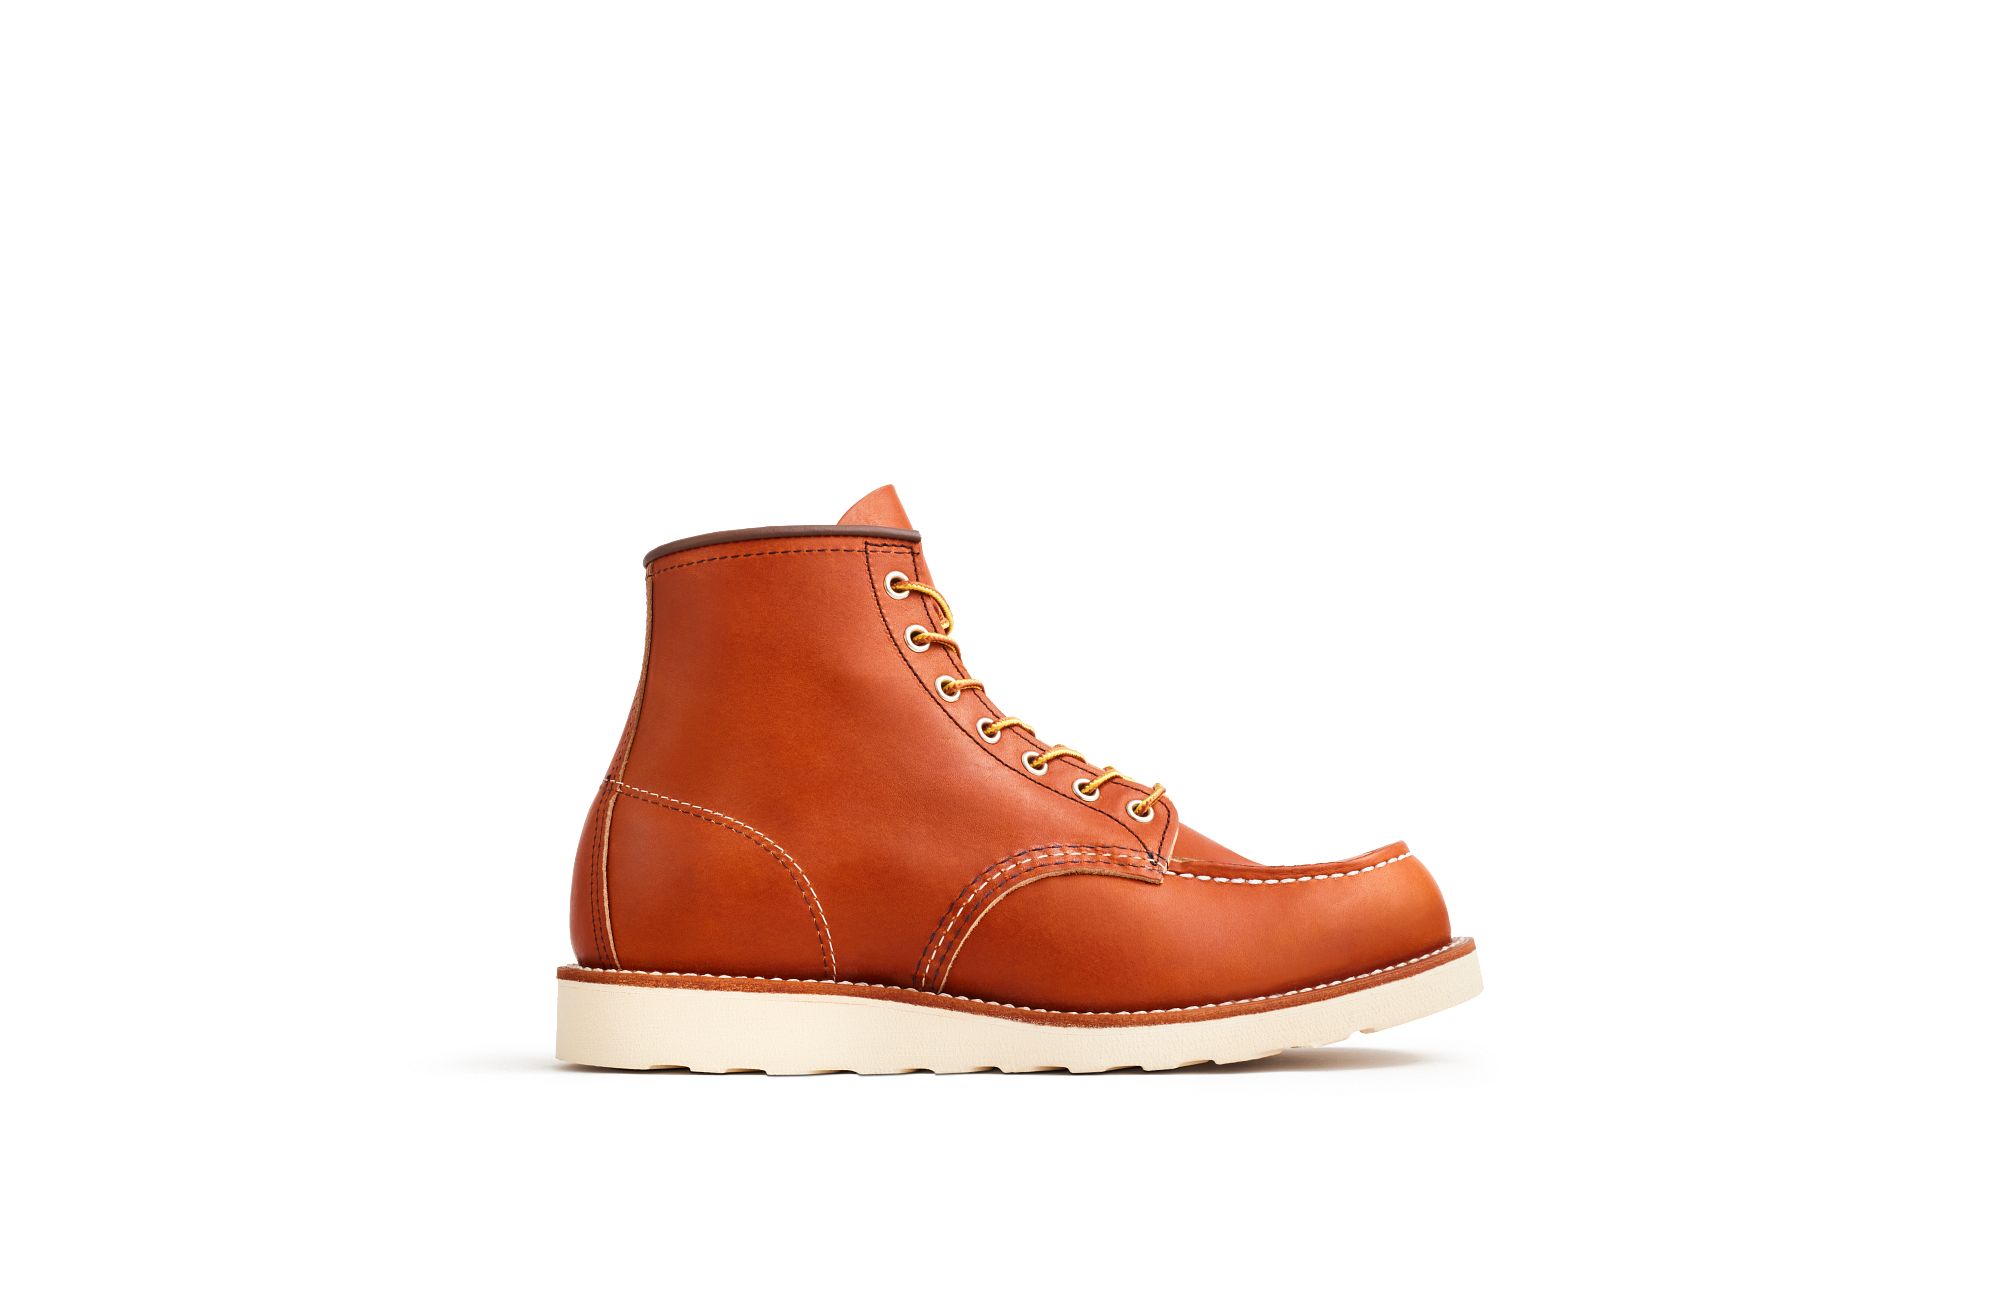 Limited-Edition Red Wing Shoes 'Chop Top' Moc Toe Boots - Long John